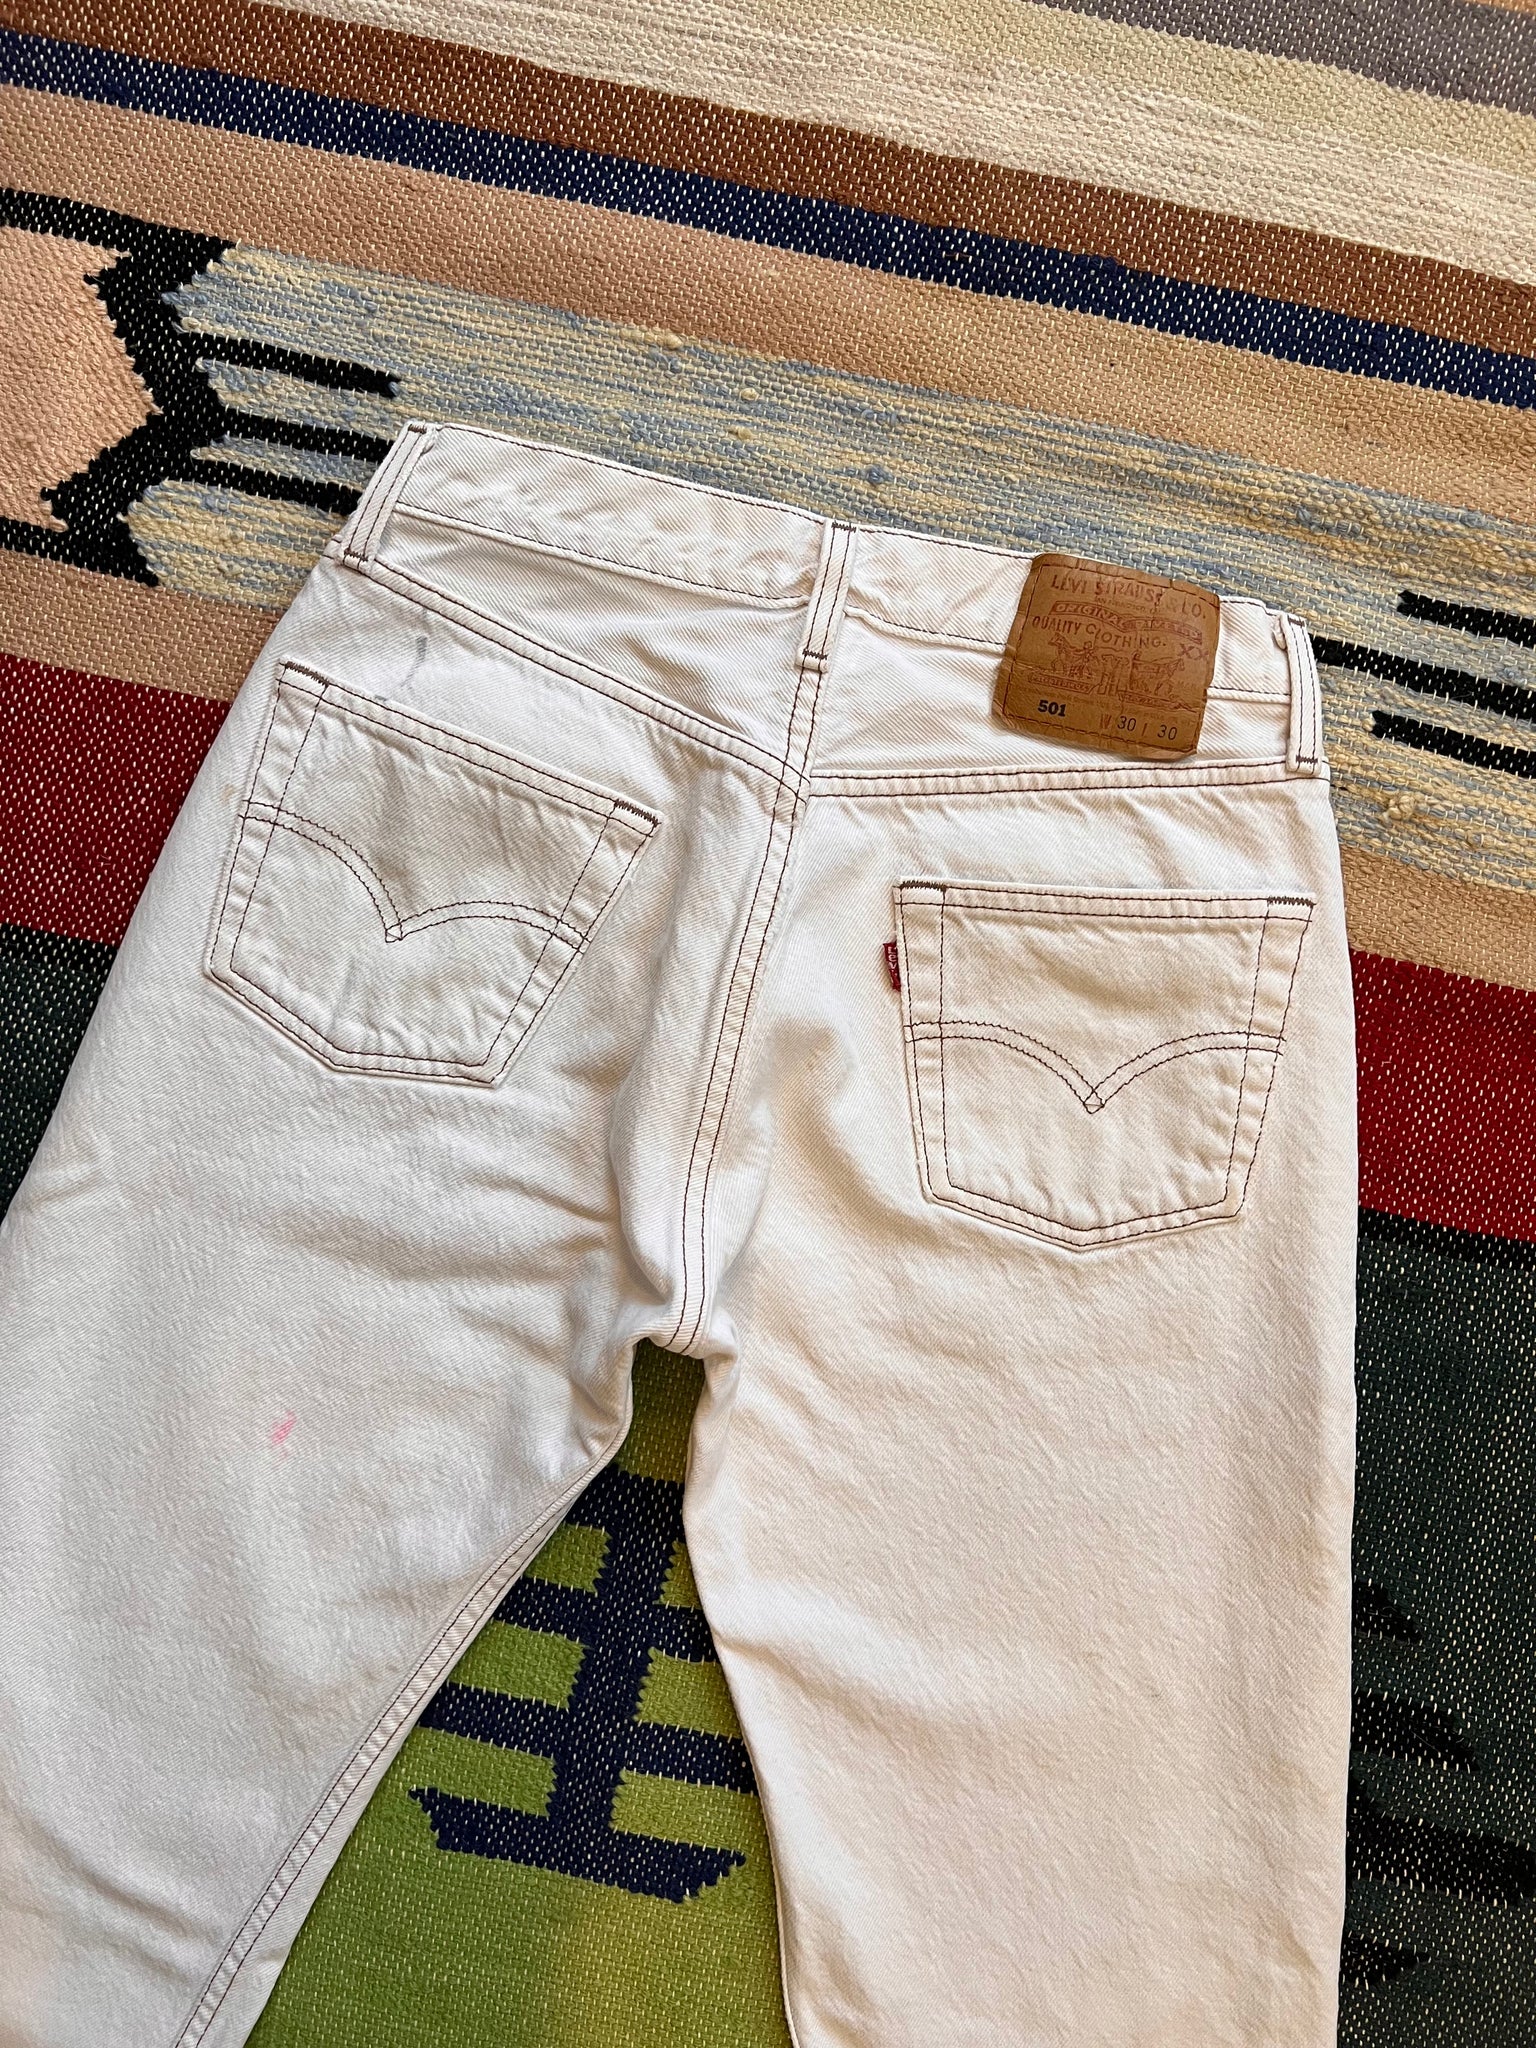 LEVI'S 501 Vintage Cream Button Fly Jeans 28” x 30” – Chambers Vintage